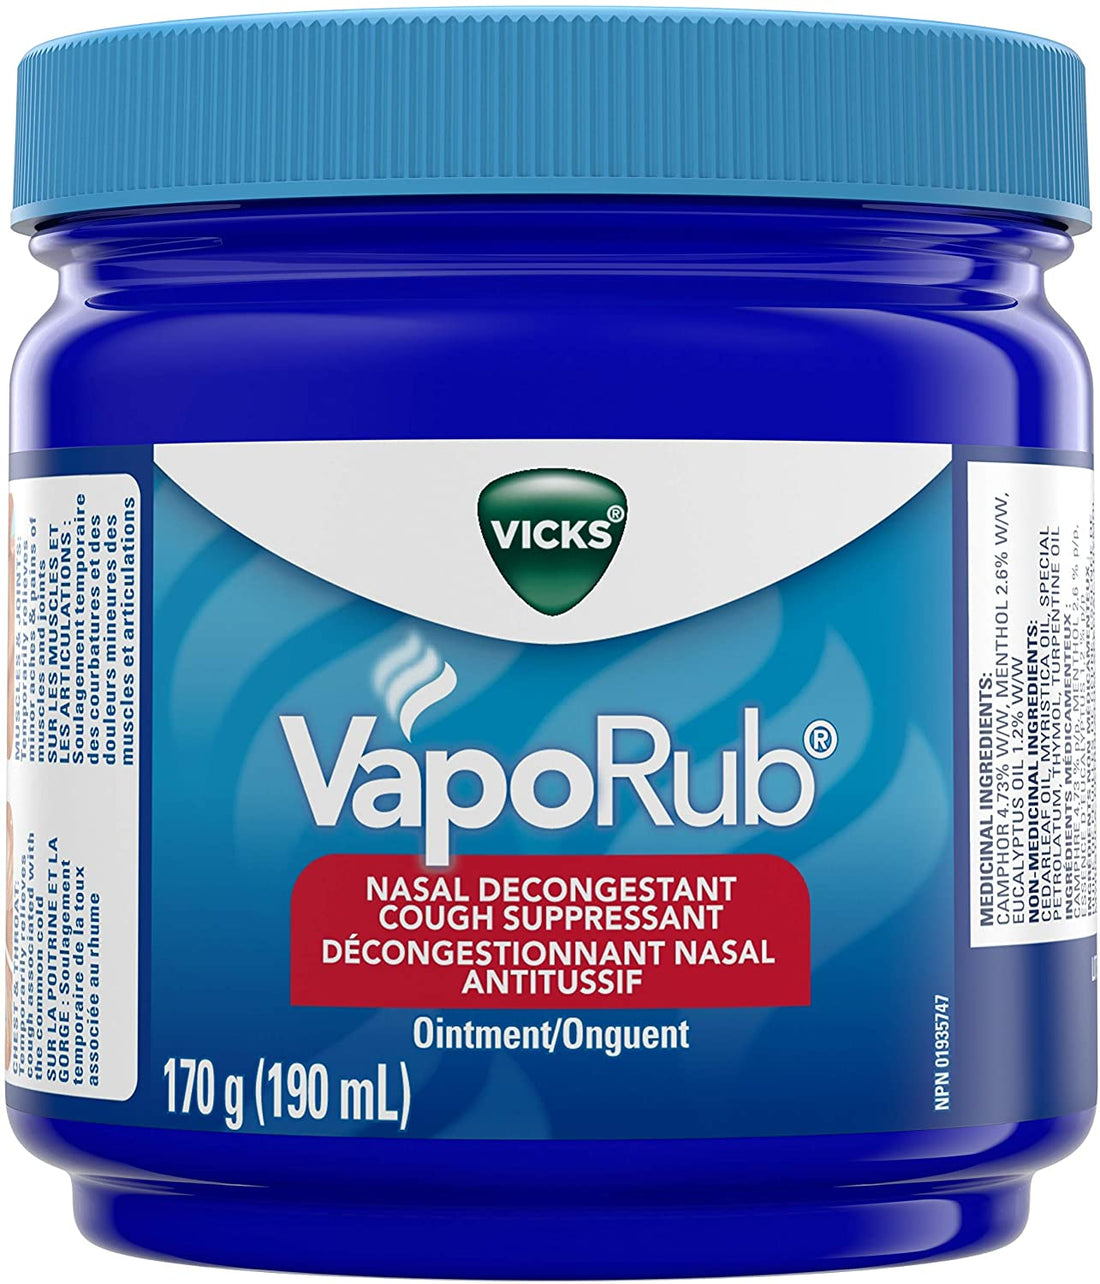 What Vicks VapoRub Can Do For Your Sinuses, Airway, Chest & Lungs.